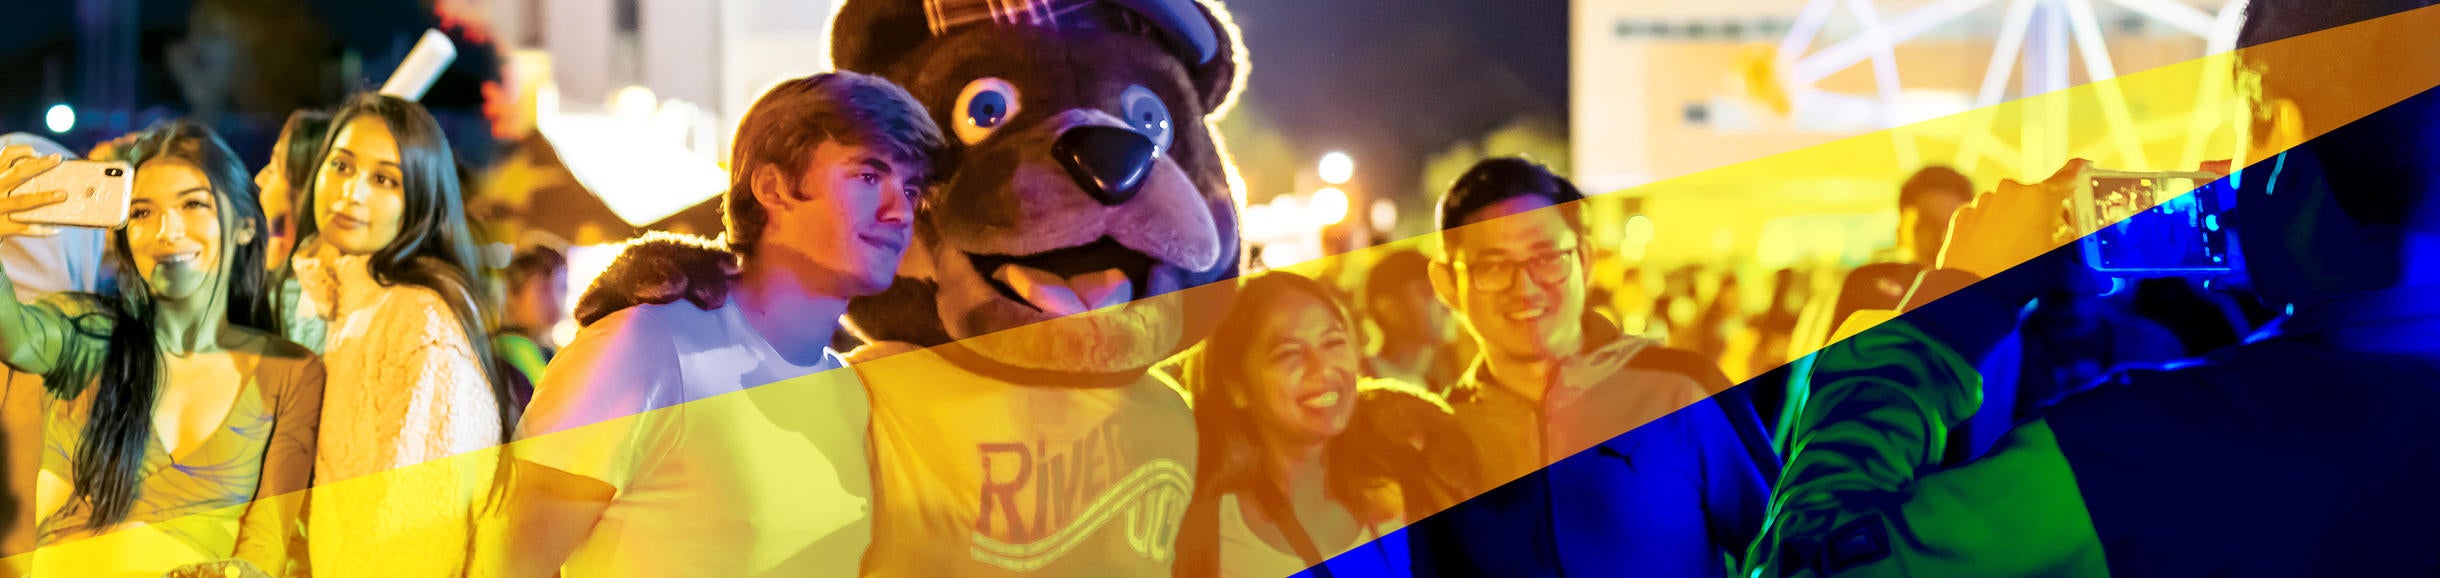 Students attend a campus concert, pose with UCR's mascot Scotty Highlander, and take selfies with friends.